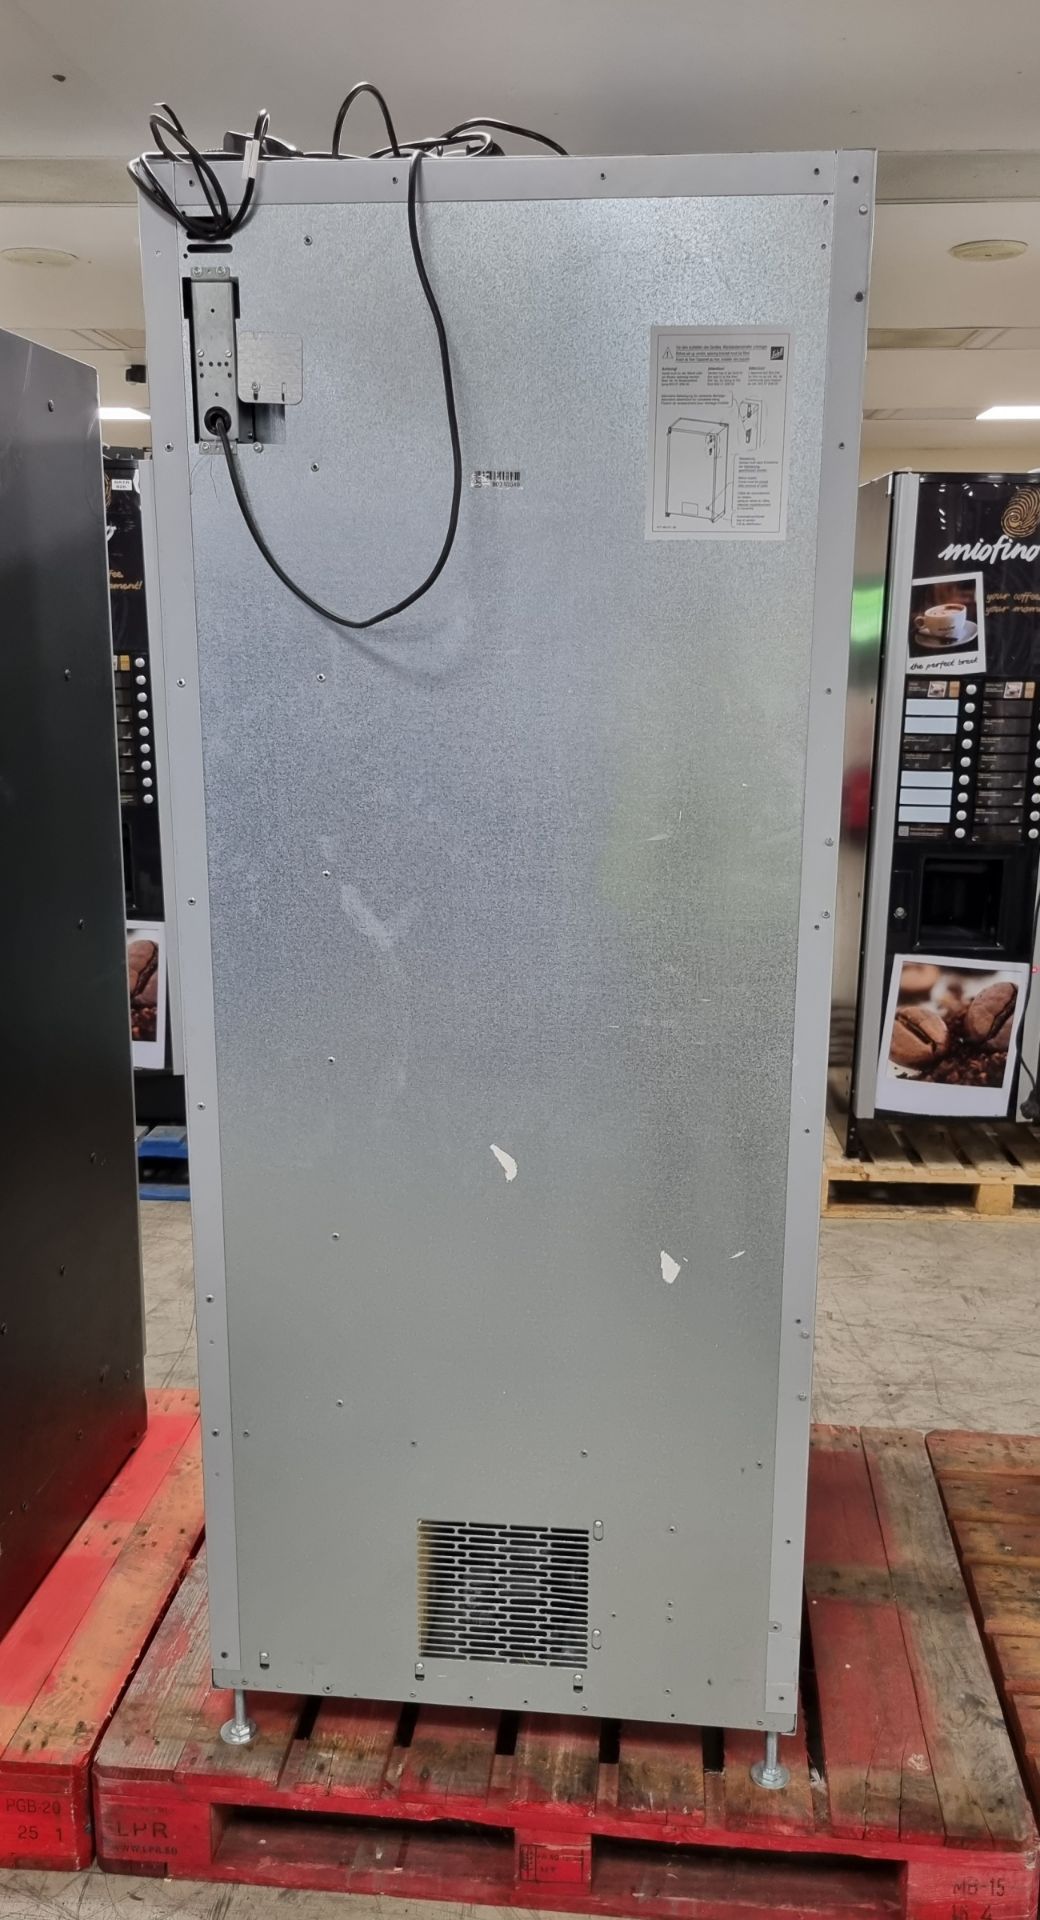 Selecta ST Tropez beverage vending machine - W 750 x D 880 x H 1930mm - HOLE IN FRONT - Image 3 of 6